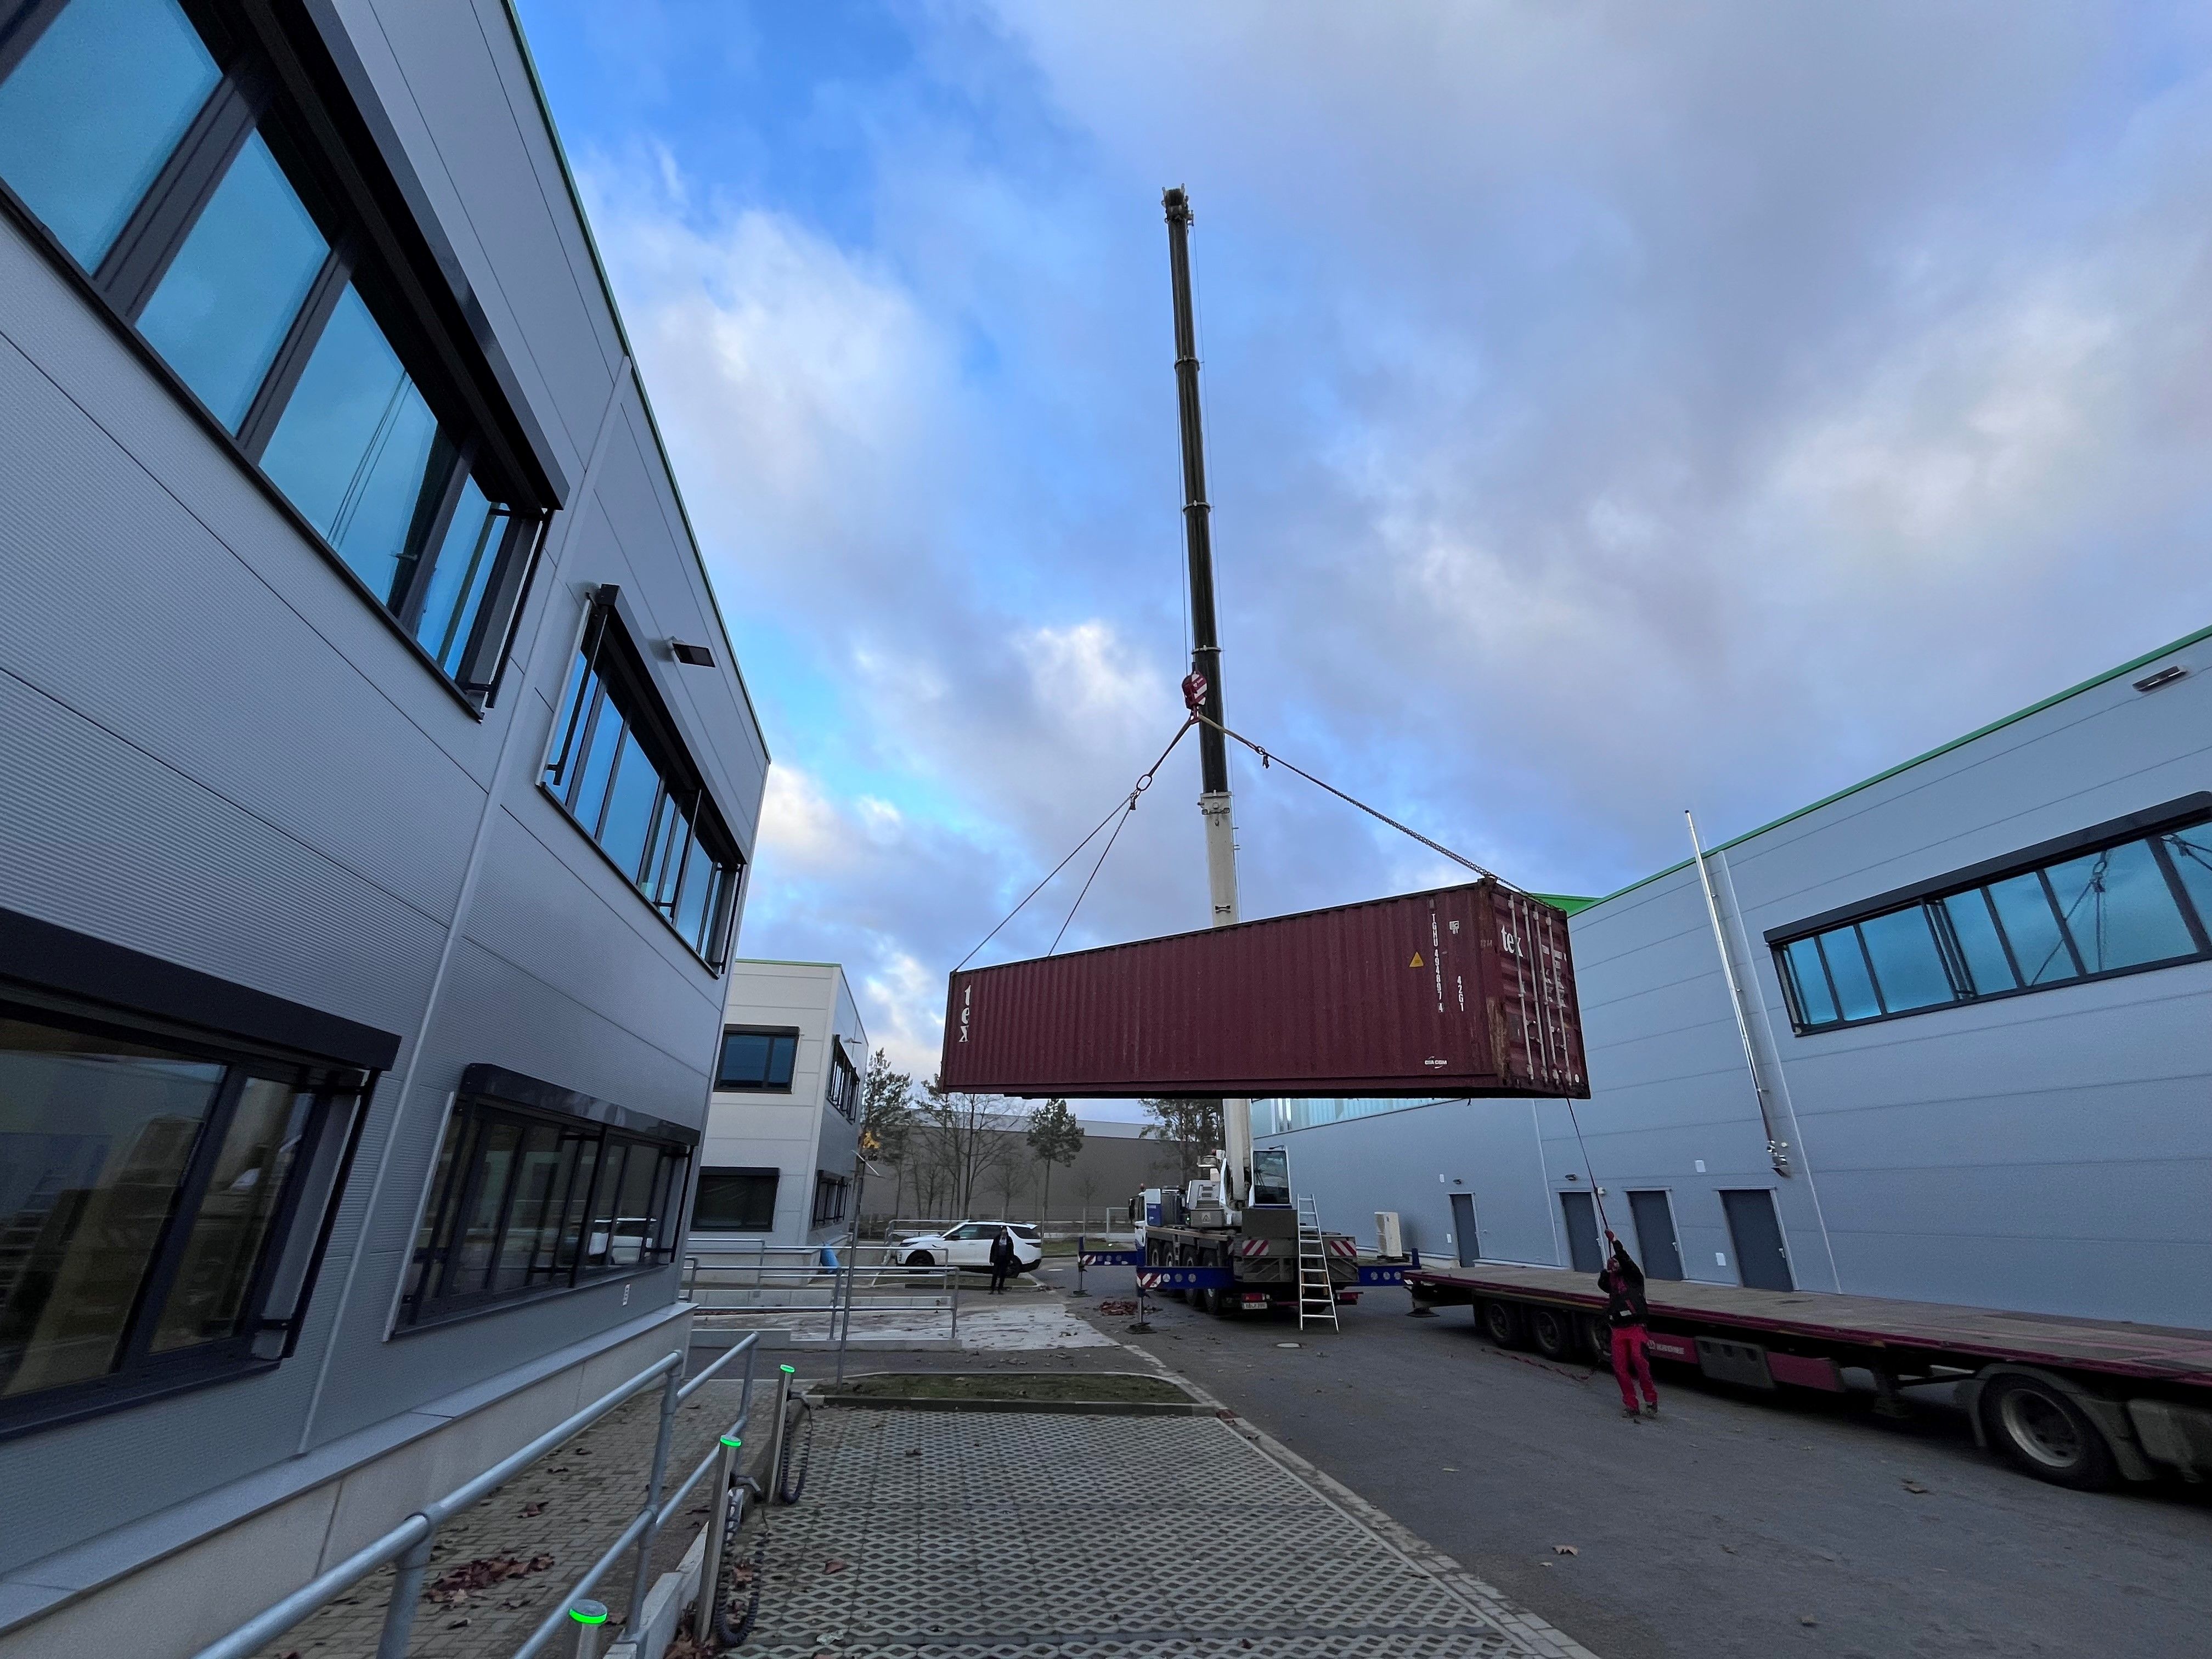 Mobile crane placing 40 foot storage container